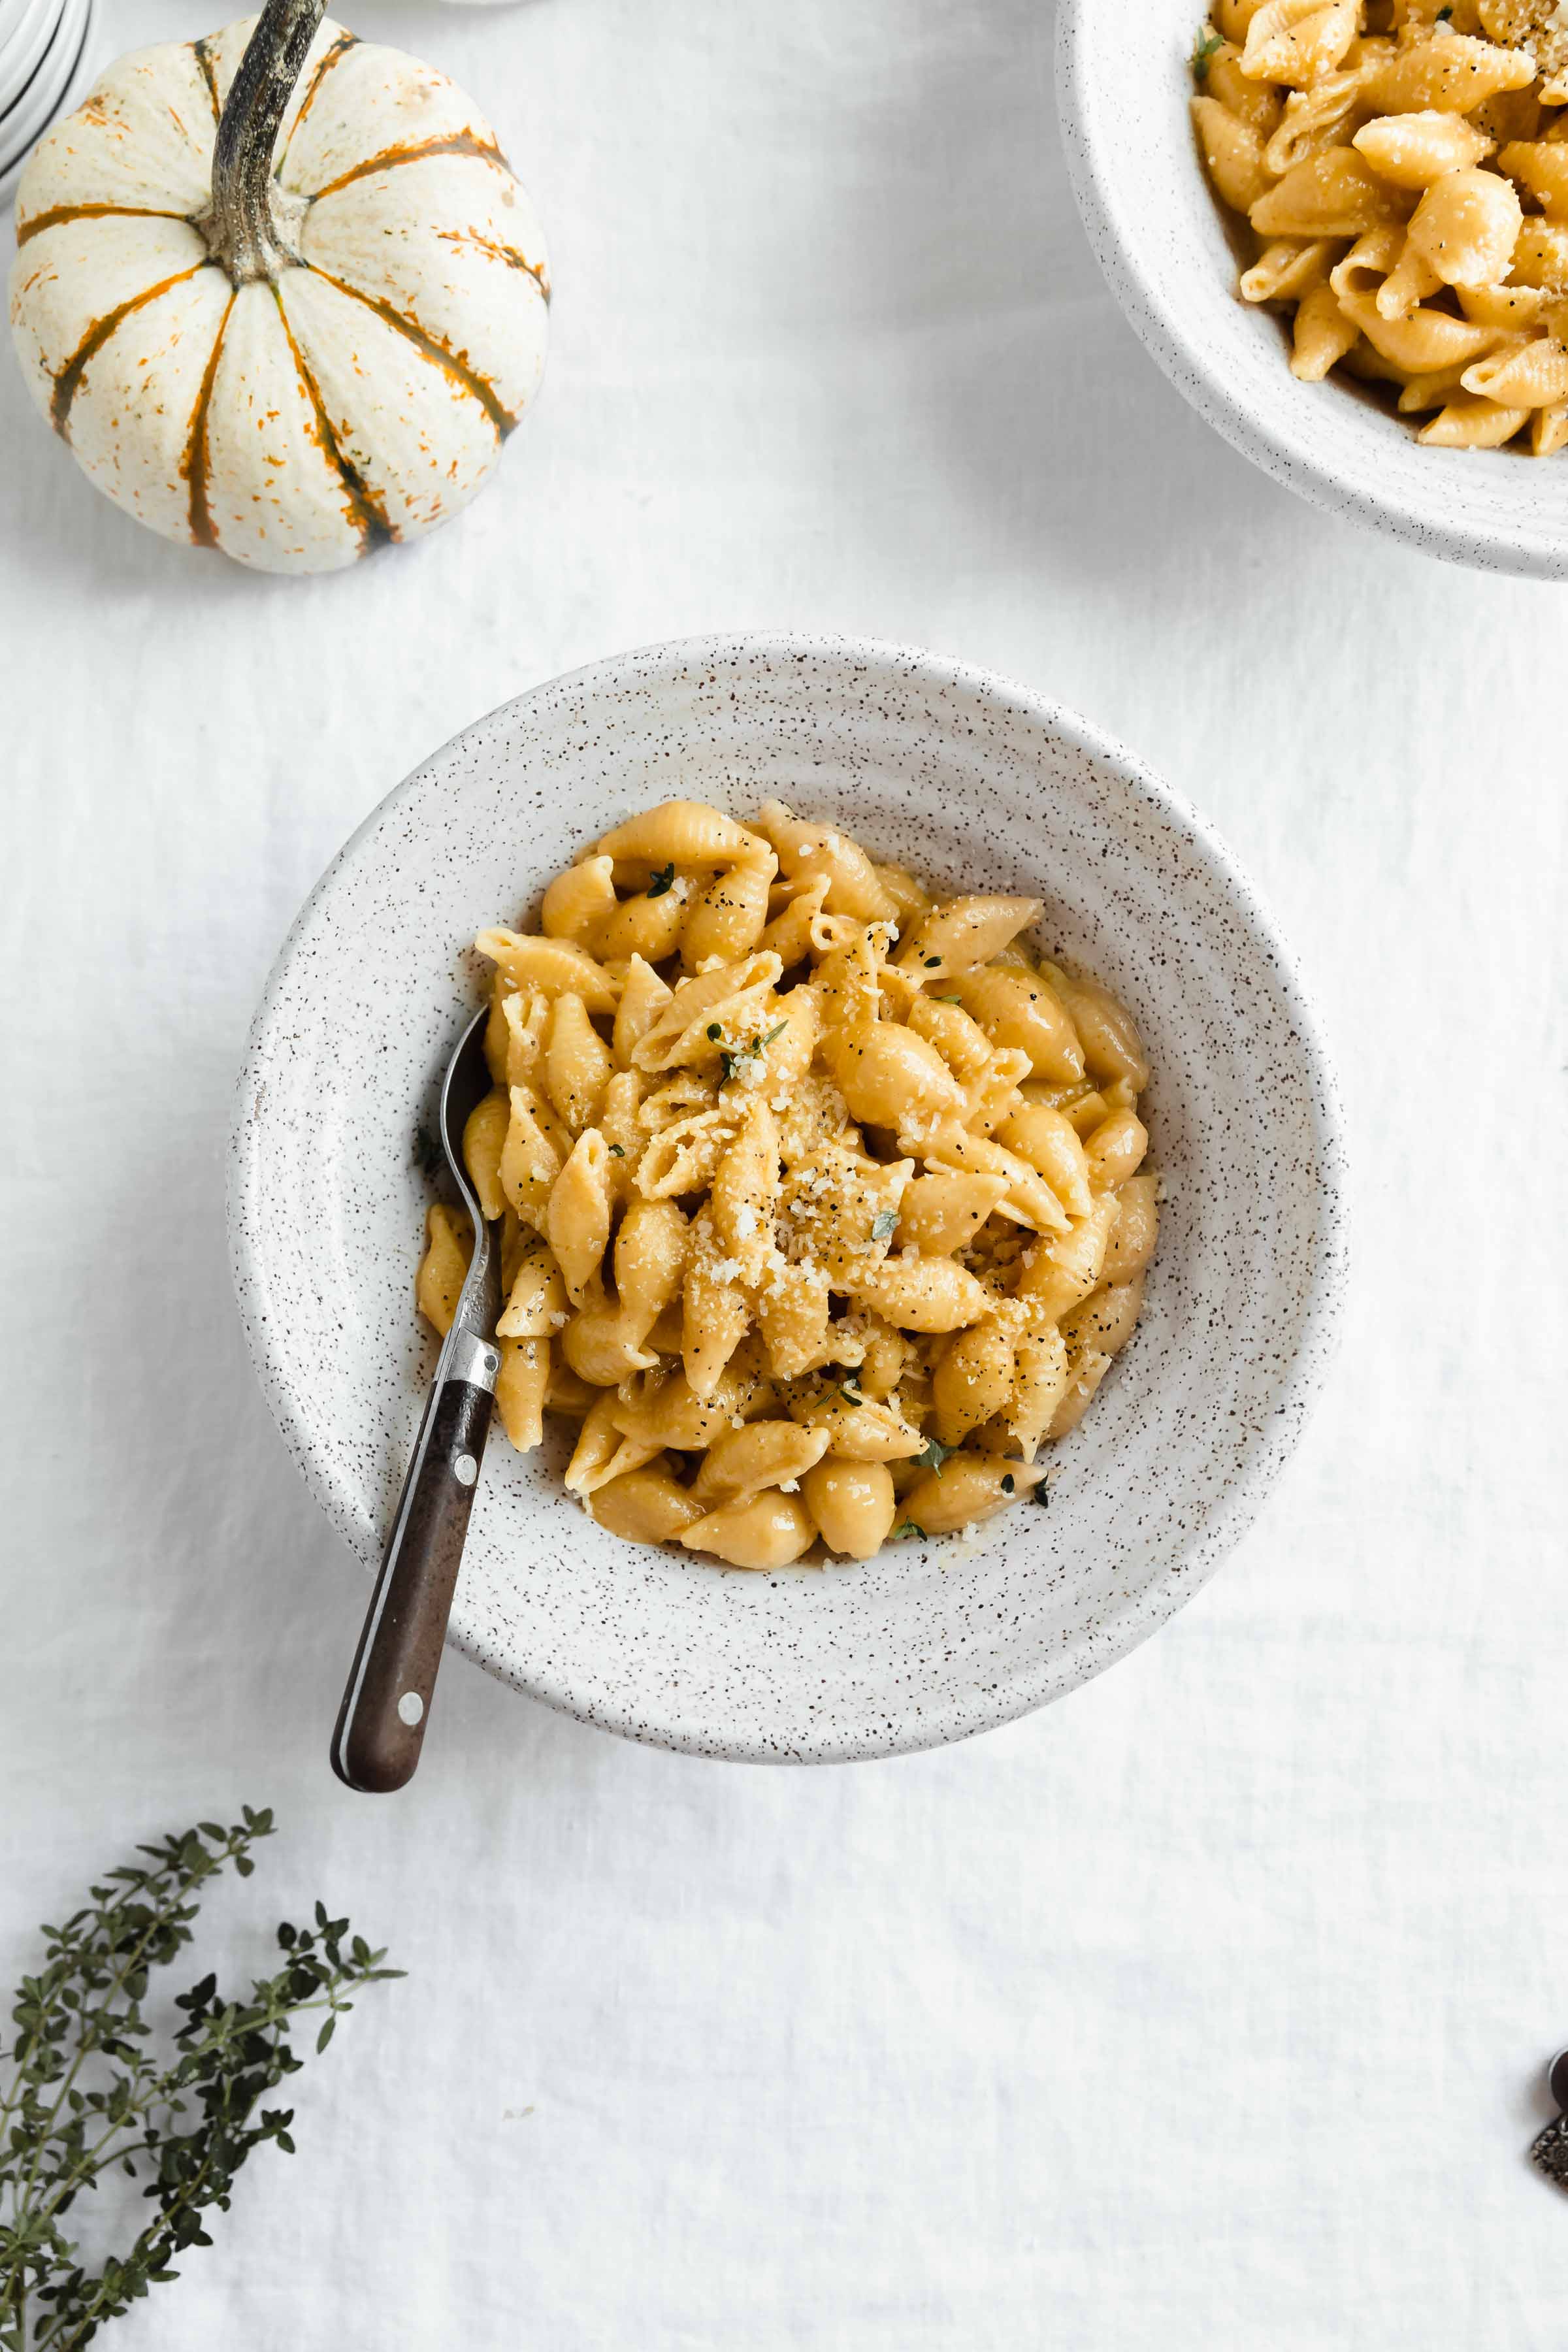 Time to get cozy! Snuggle up with a big bowl of this healthyish homemade pumpkin mac and cheese. Made with gruyere, cheddar, pumpkin and a hint of nutmeg!